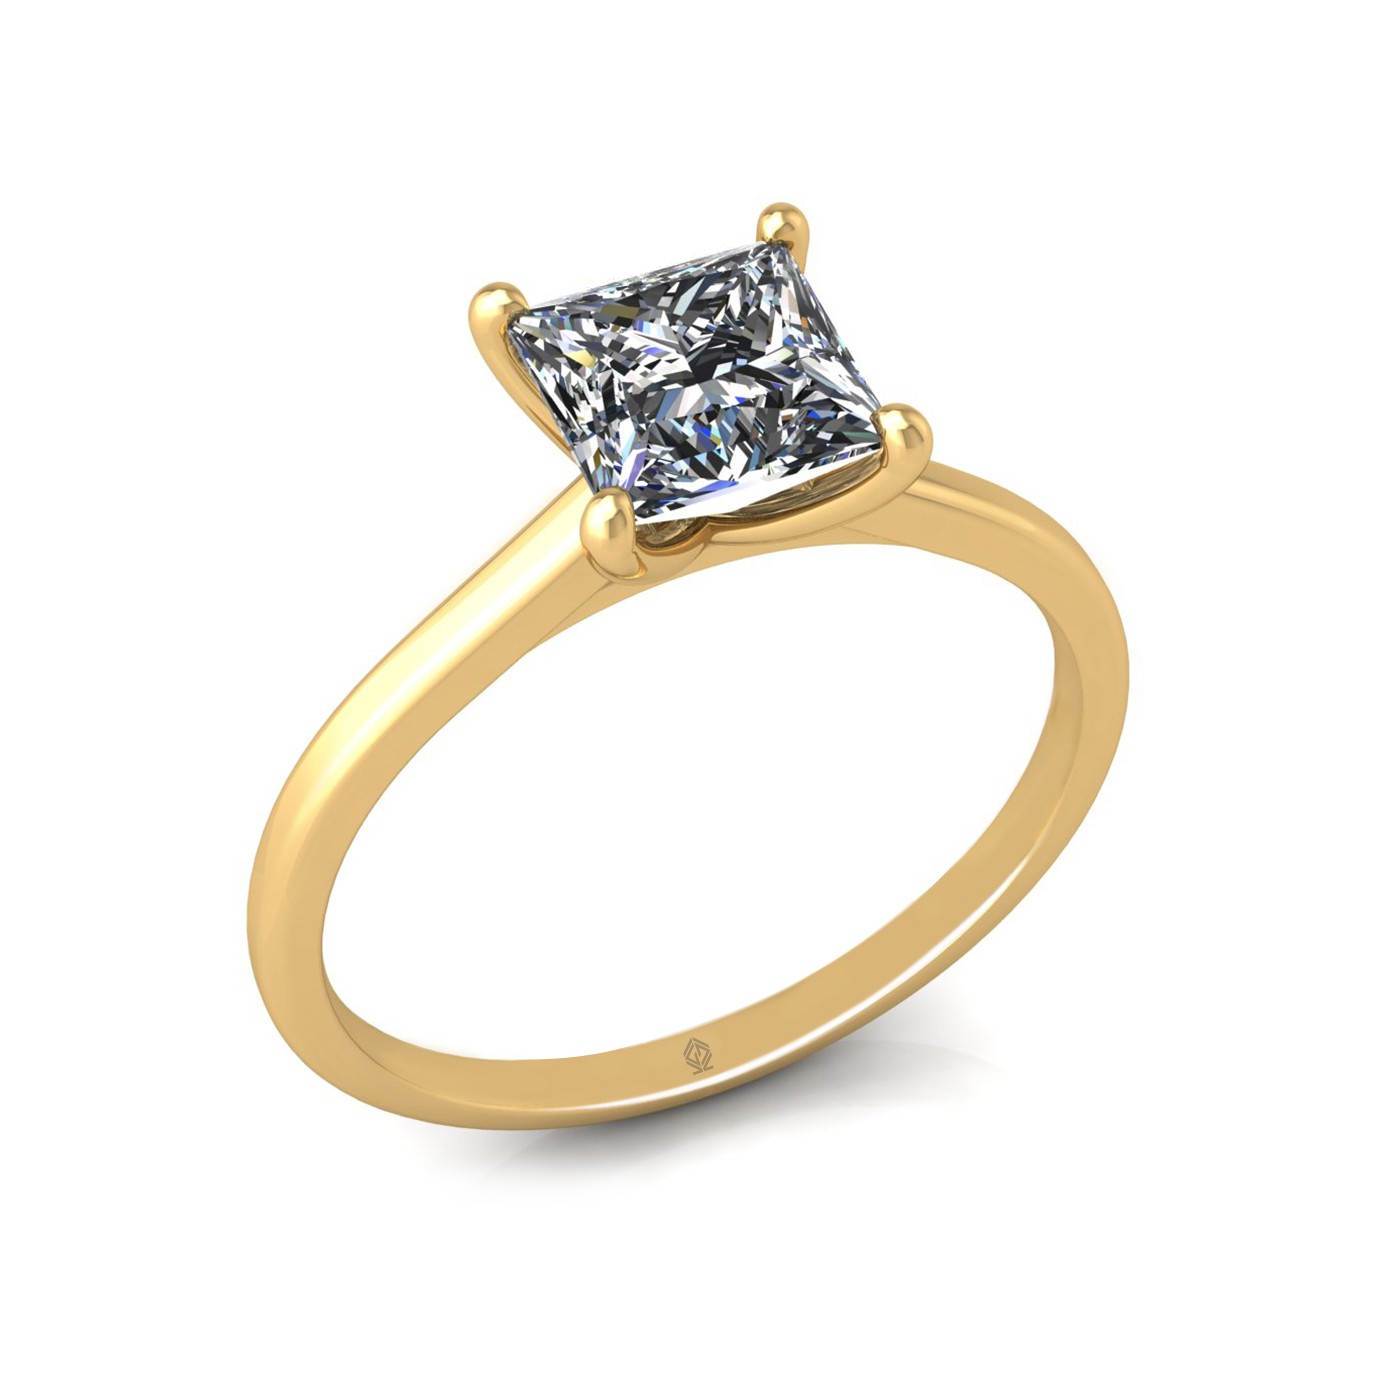 18k yellow gold  1,20 ct 4 prongs solitaire princess cut diamond engagement ring with whisper thin band